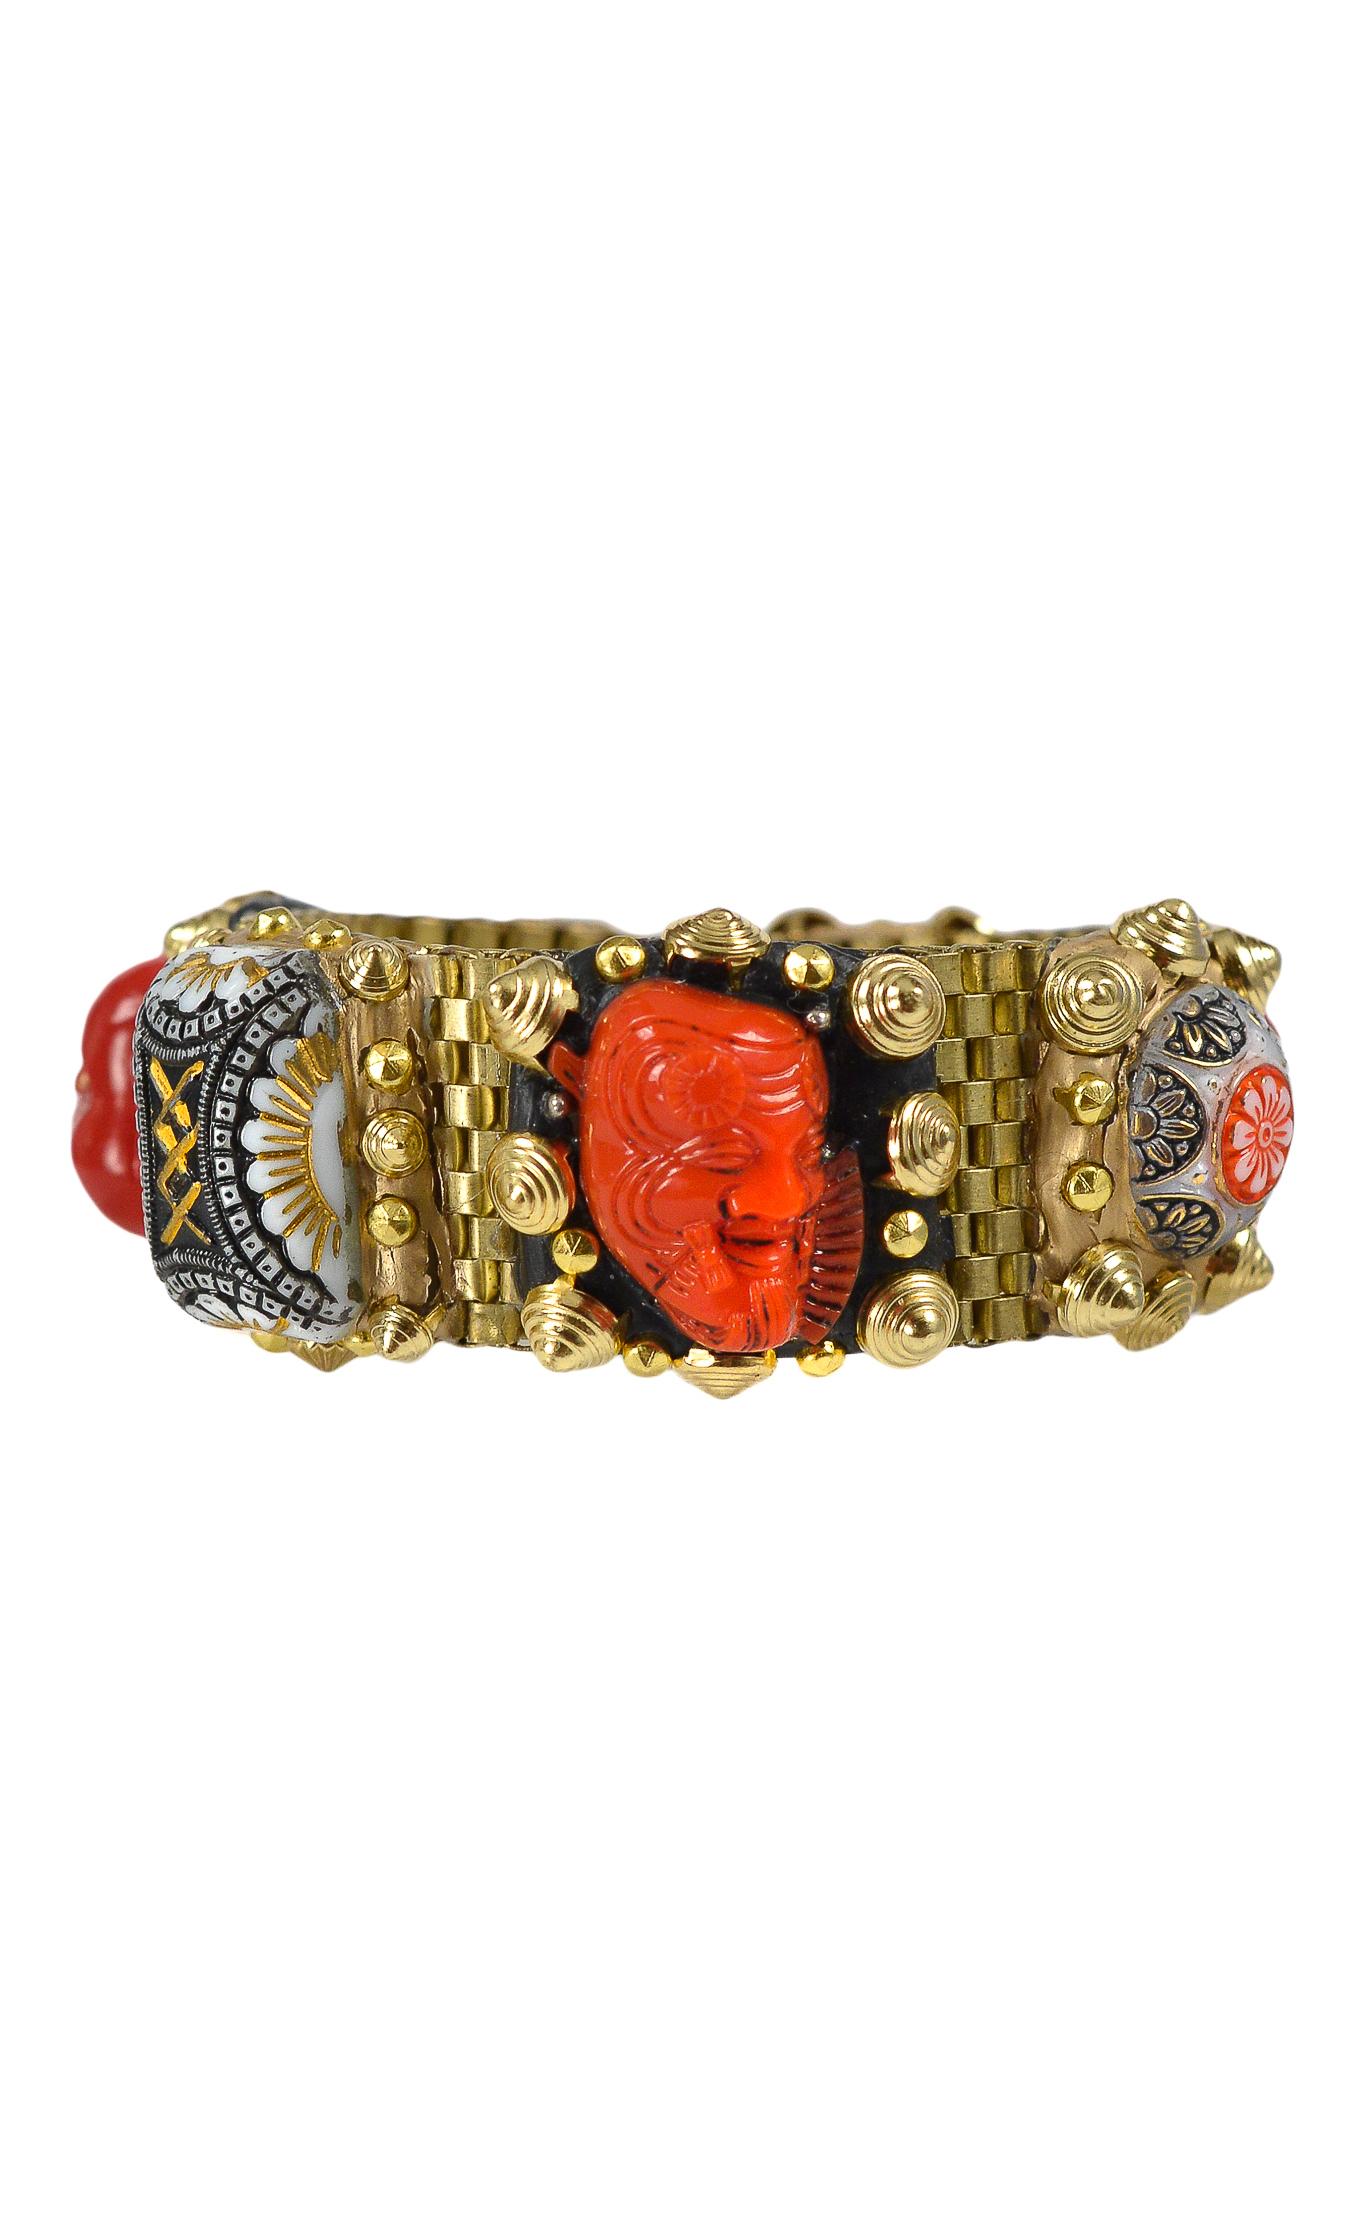 Richard Minadeo brass link bracelet featuring vintage red Buddha, red Noh mask, snakes, and floral symbols set in gold and black resin with gold studs. Handmade, one-of-a-kind piece.

We are pleased to announce Resurrected: Richard Minadeo and the